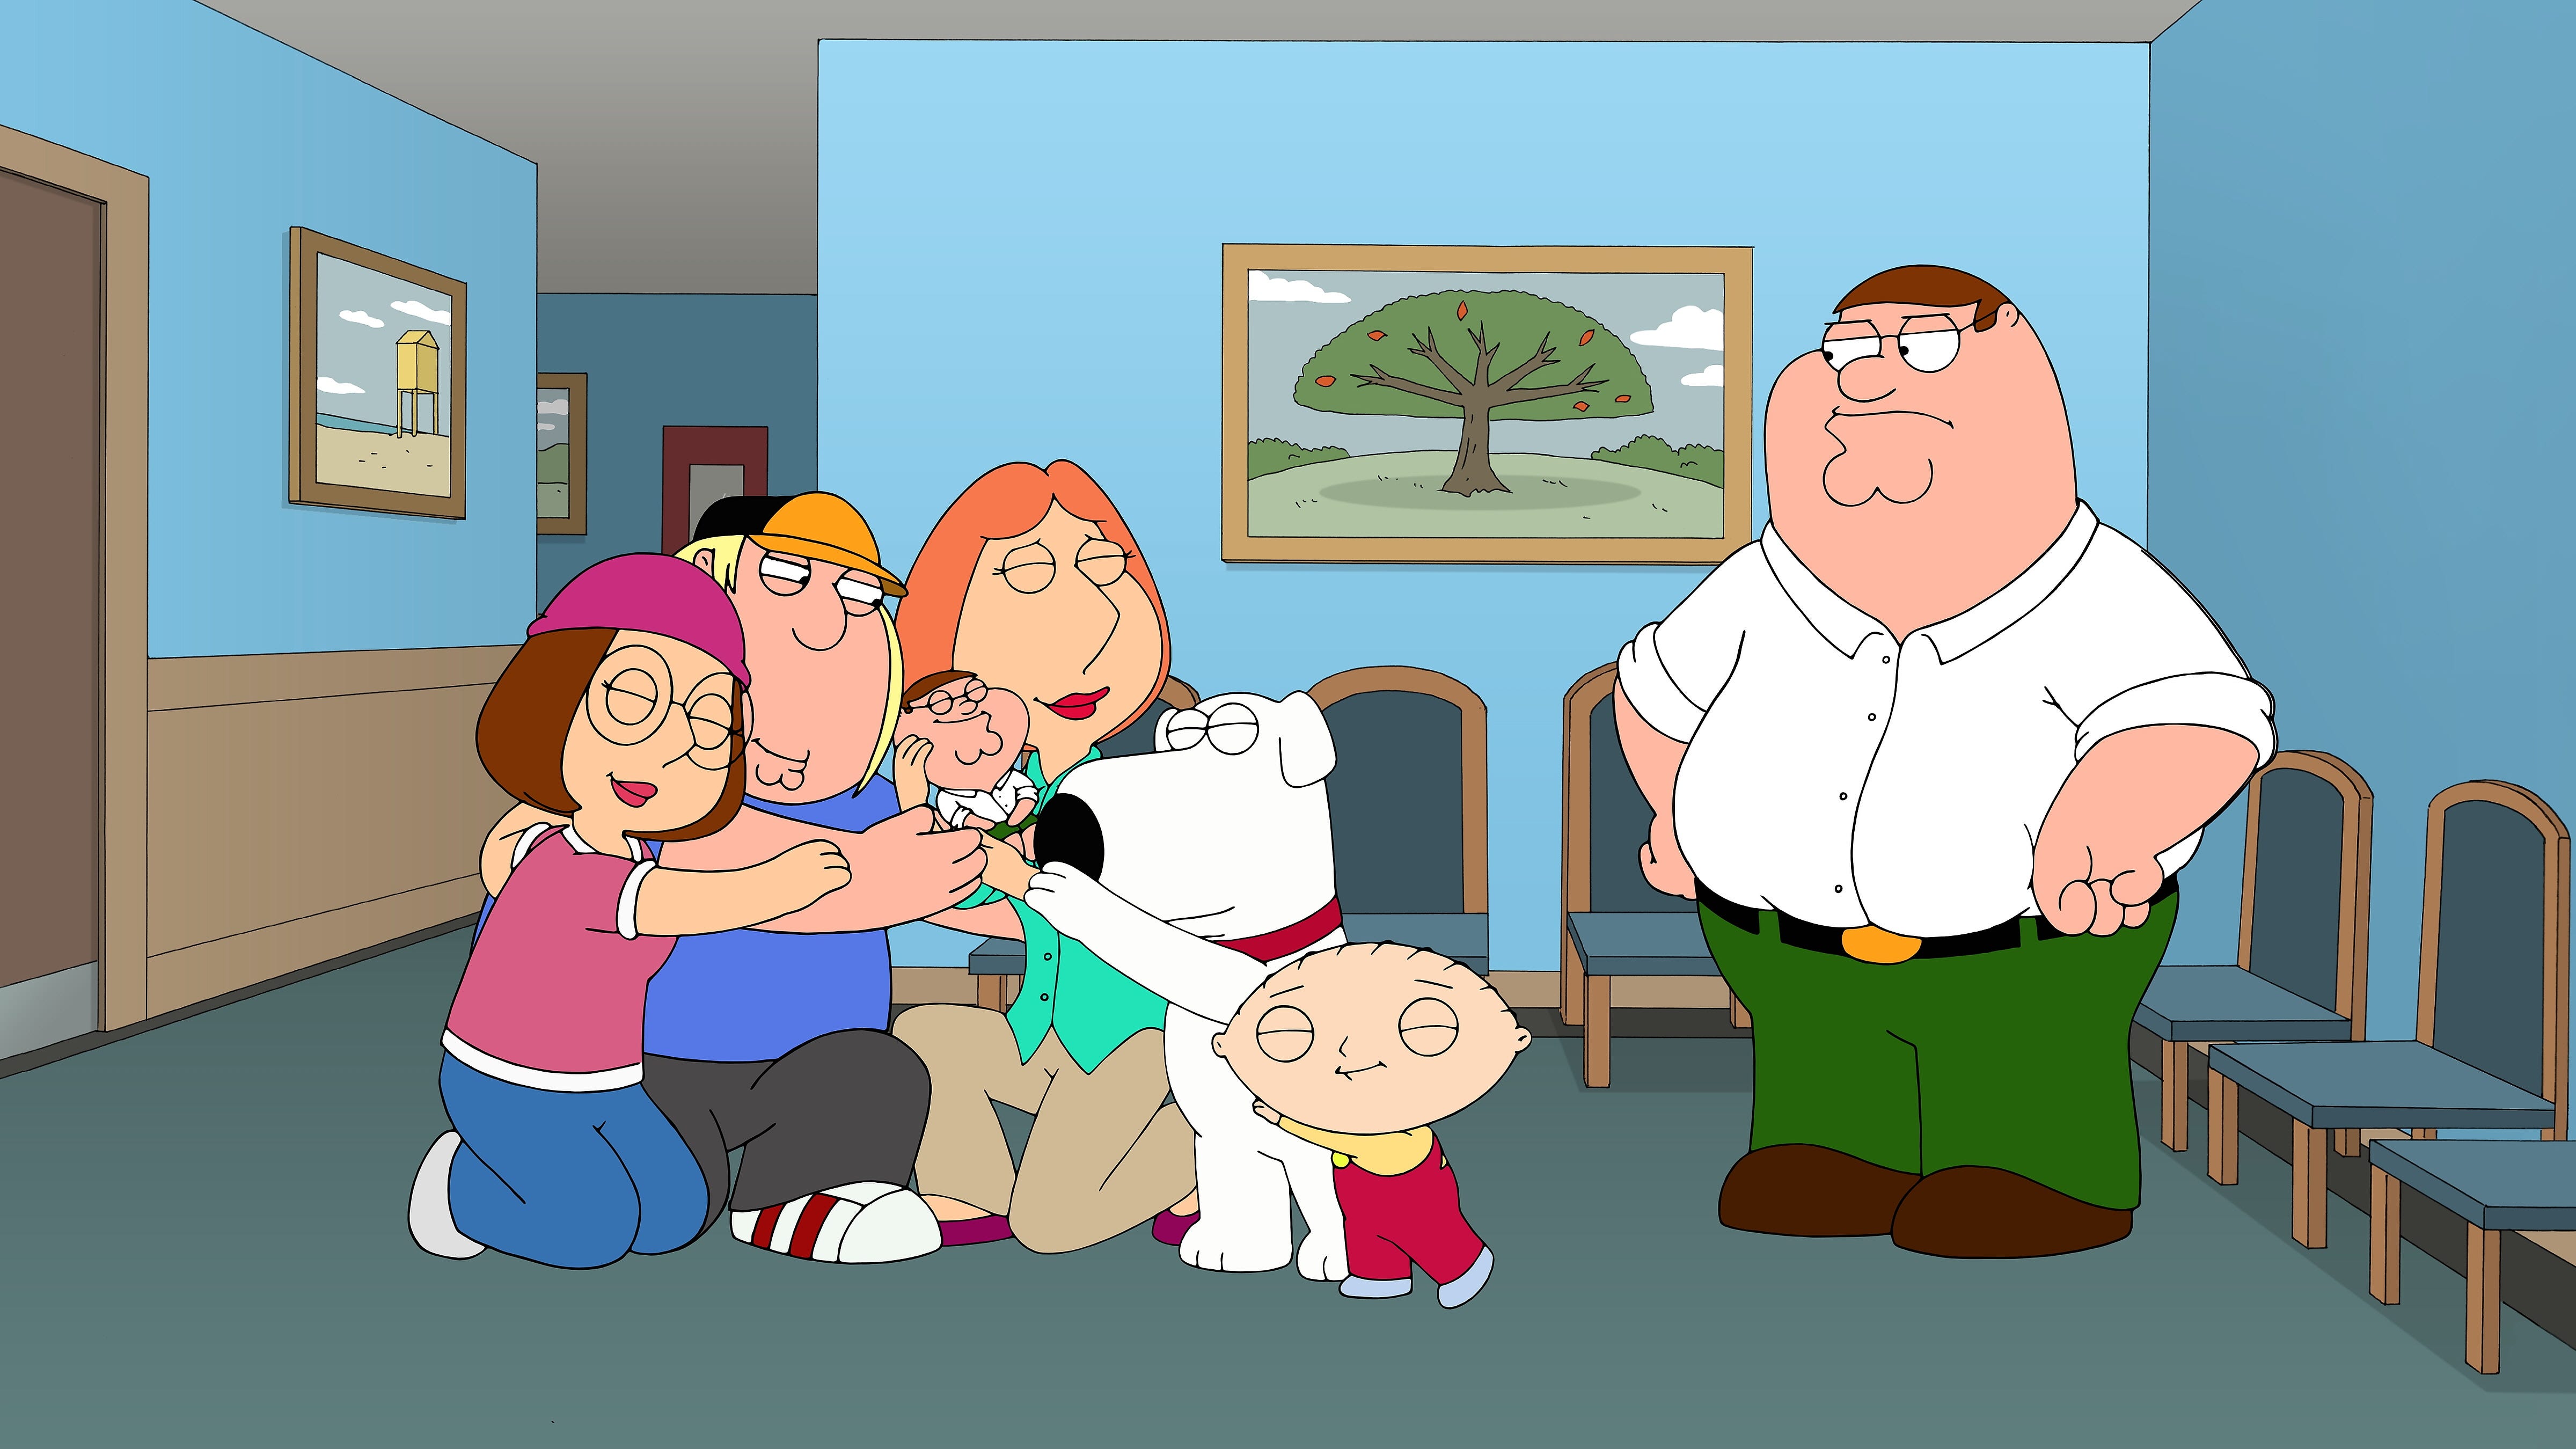 Why was Family Guy character killed off? BackSt pic